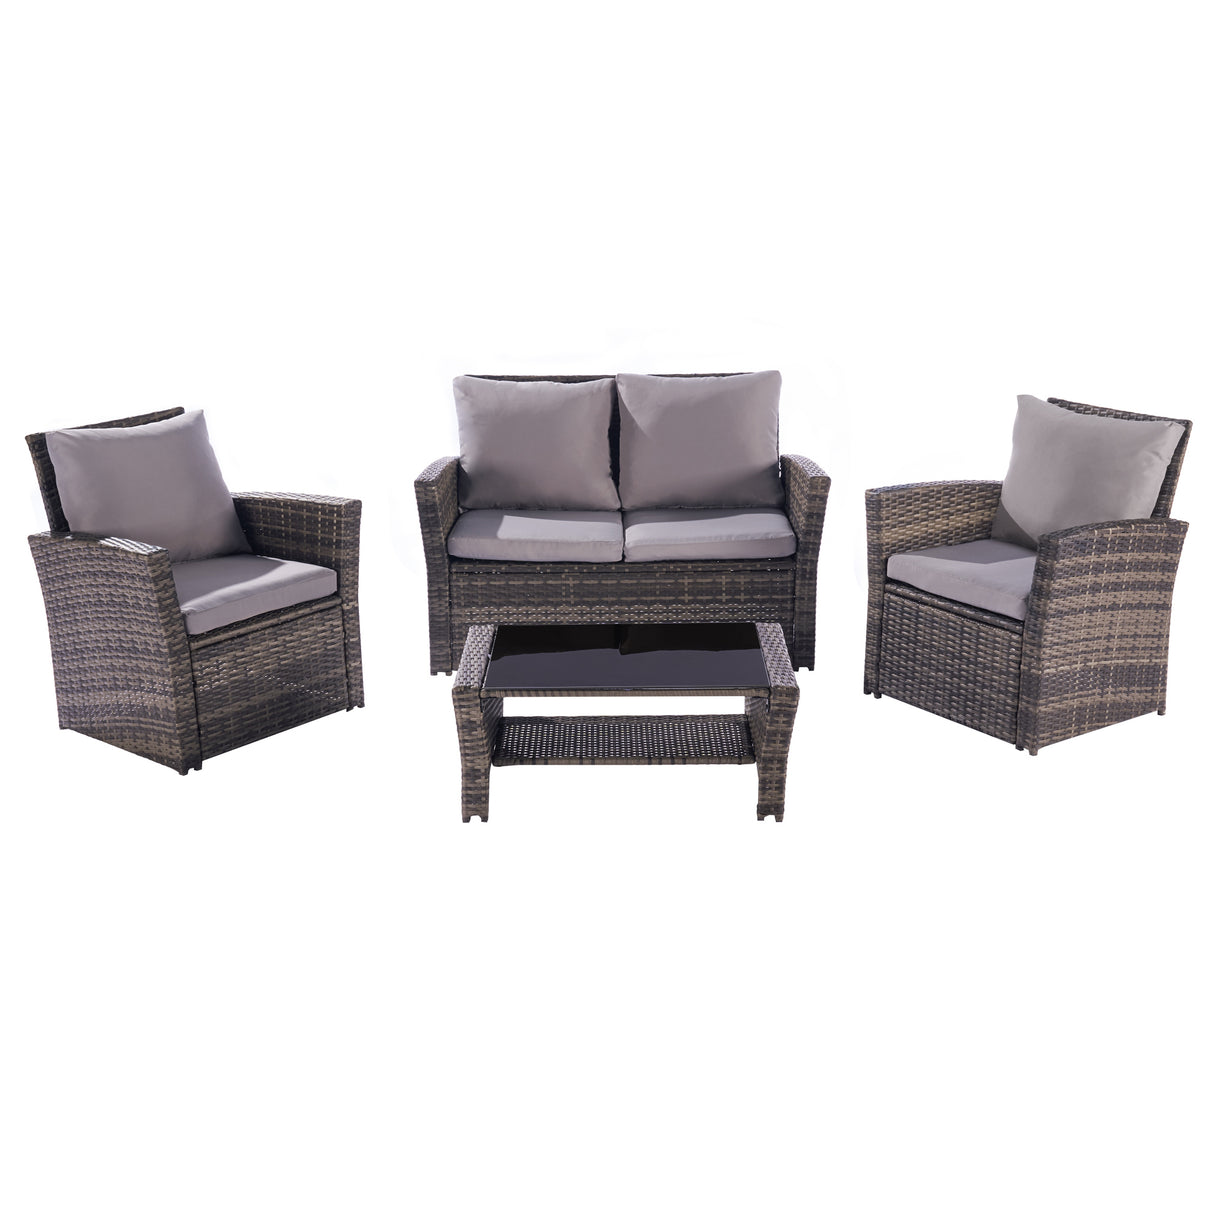 4 Pieces Outdoor Patio Furniture Sets Garden Rattan Chair Wicker Set, Poolside Lawn Chairs with Tempered Glass Coffee Table Porch Furniture